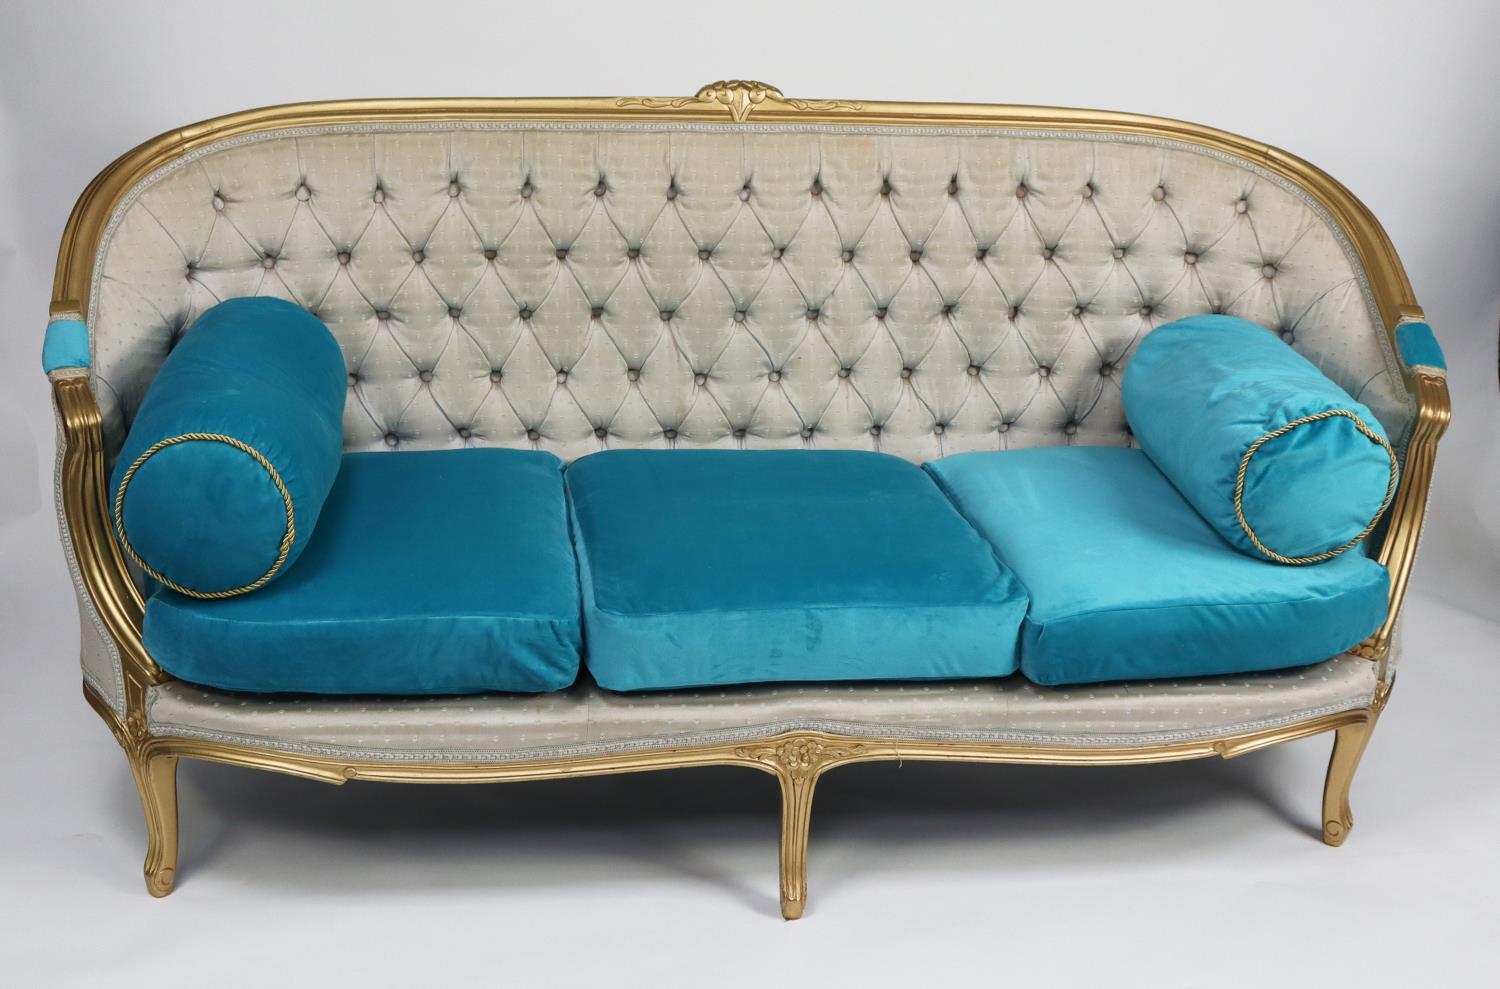 MOULDED AND CRAVED GILT WOOD FRAMED FRENCH SETTEE AND MATCHING PAIR OF TUB CHAIRS, each covered with